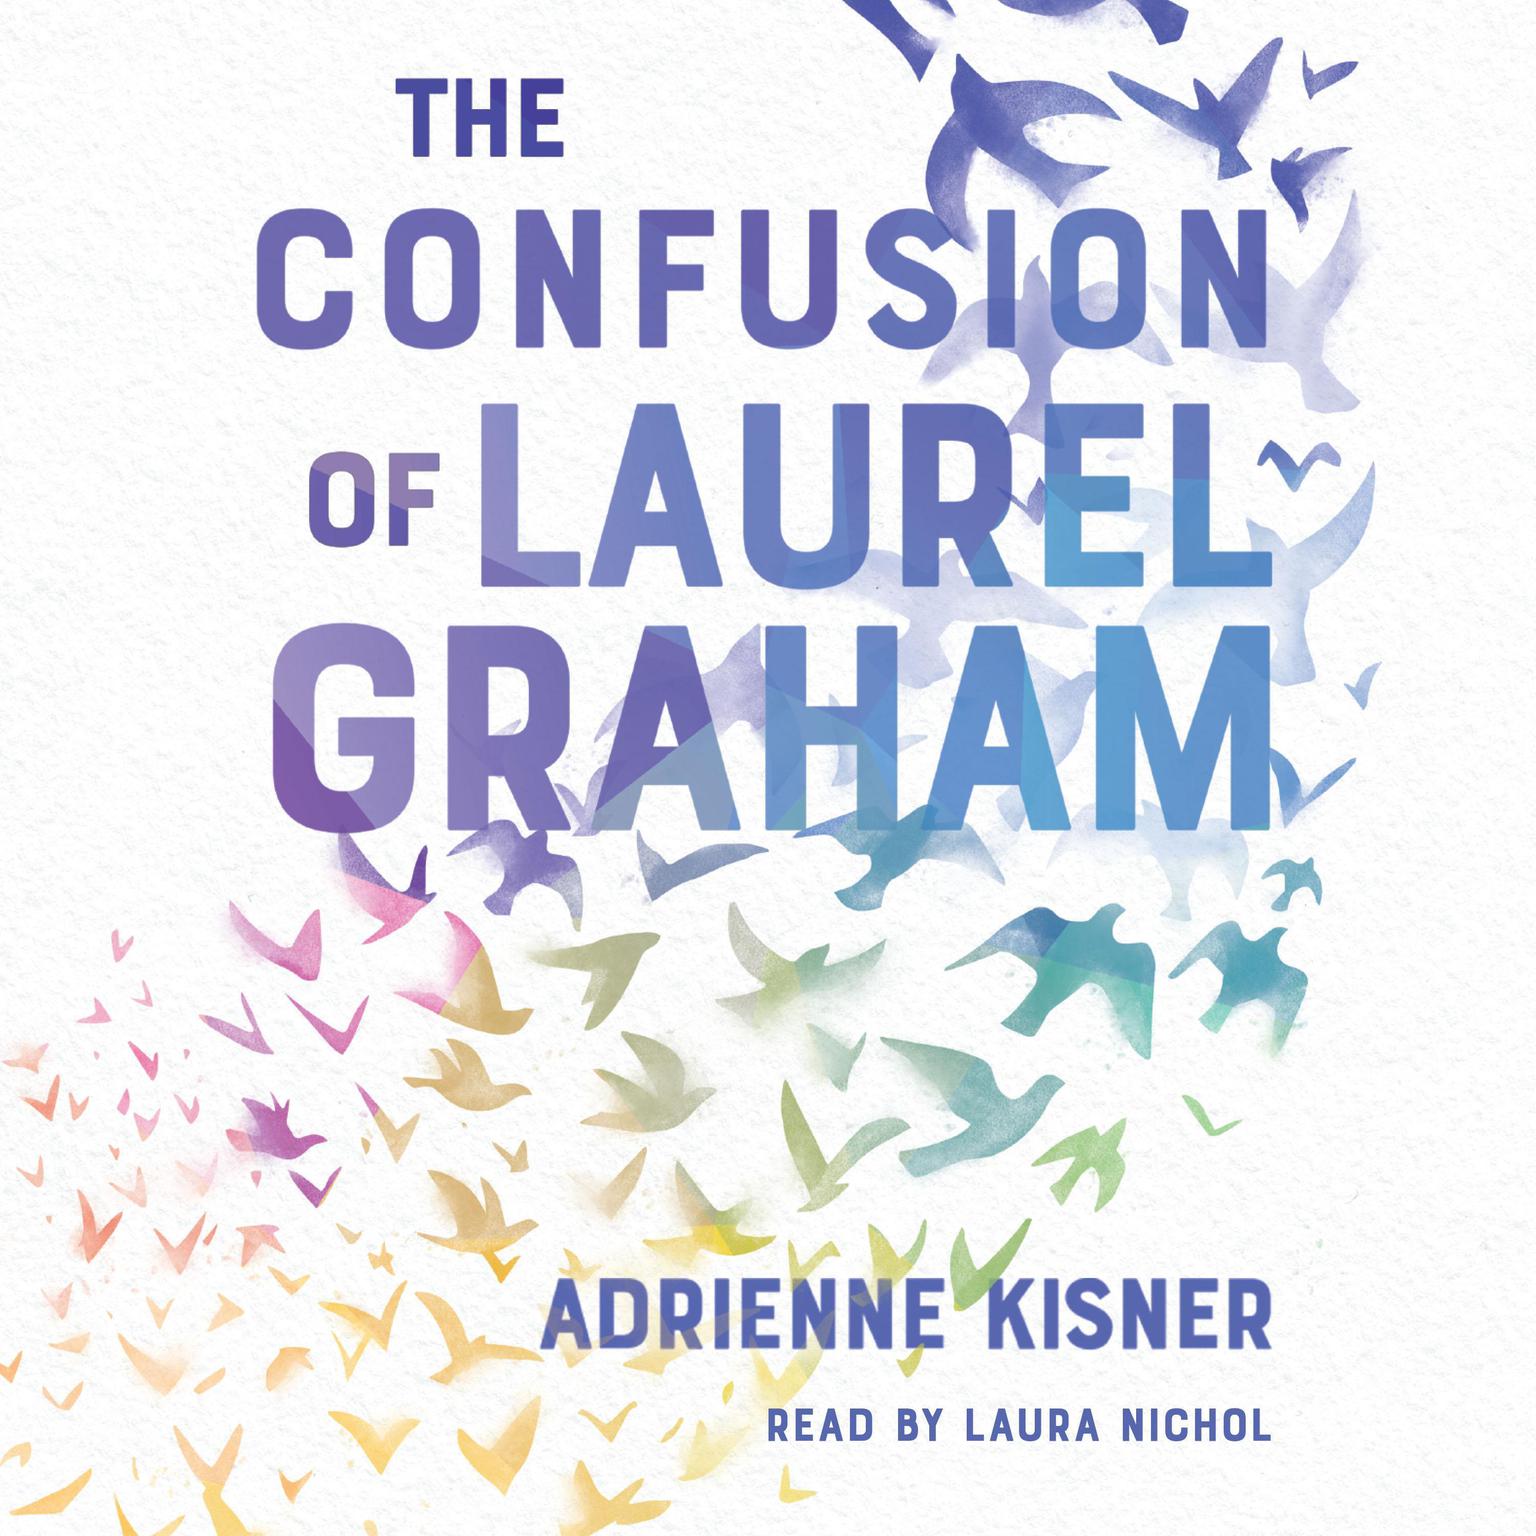 The Confusion of Laurel Graham Audiobook, by Adrienne Kisner